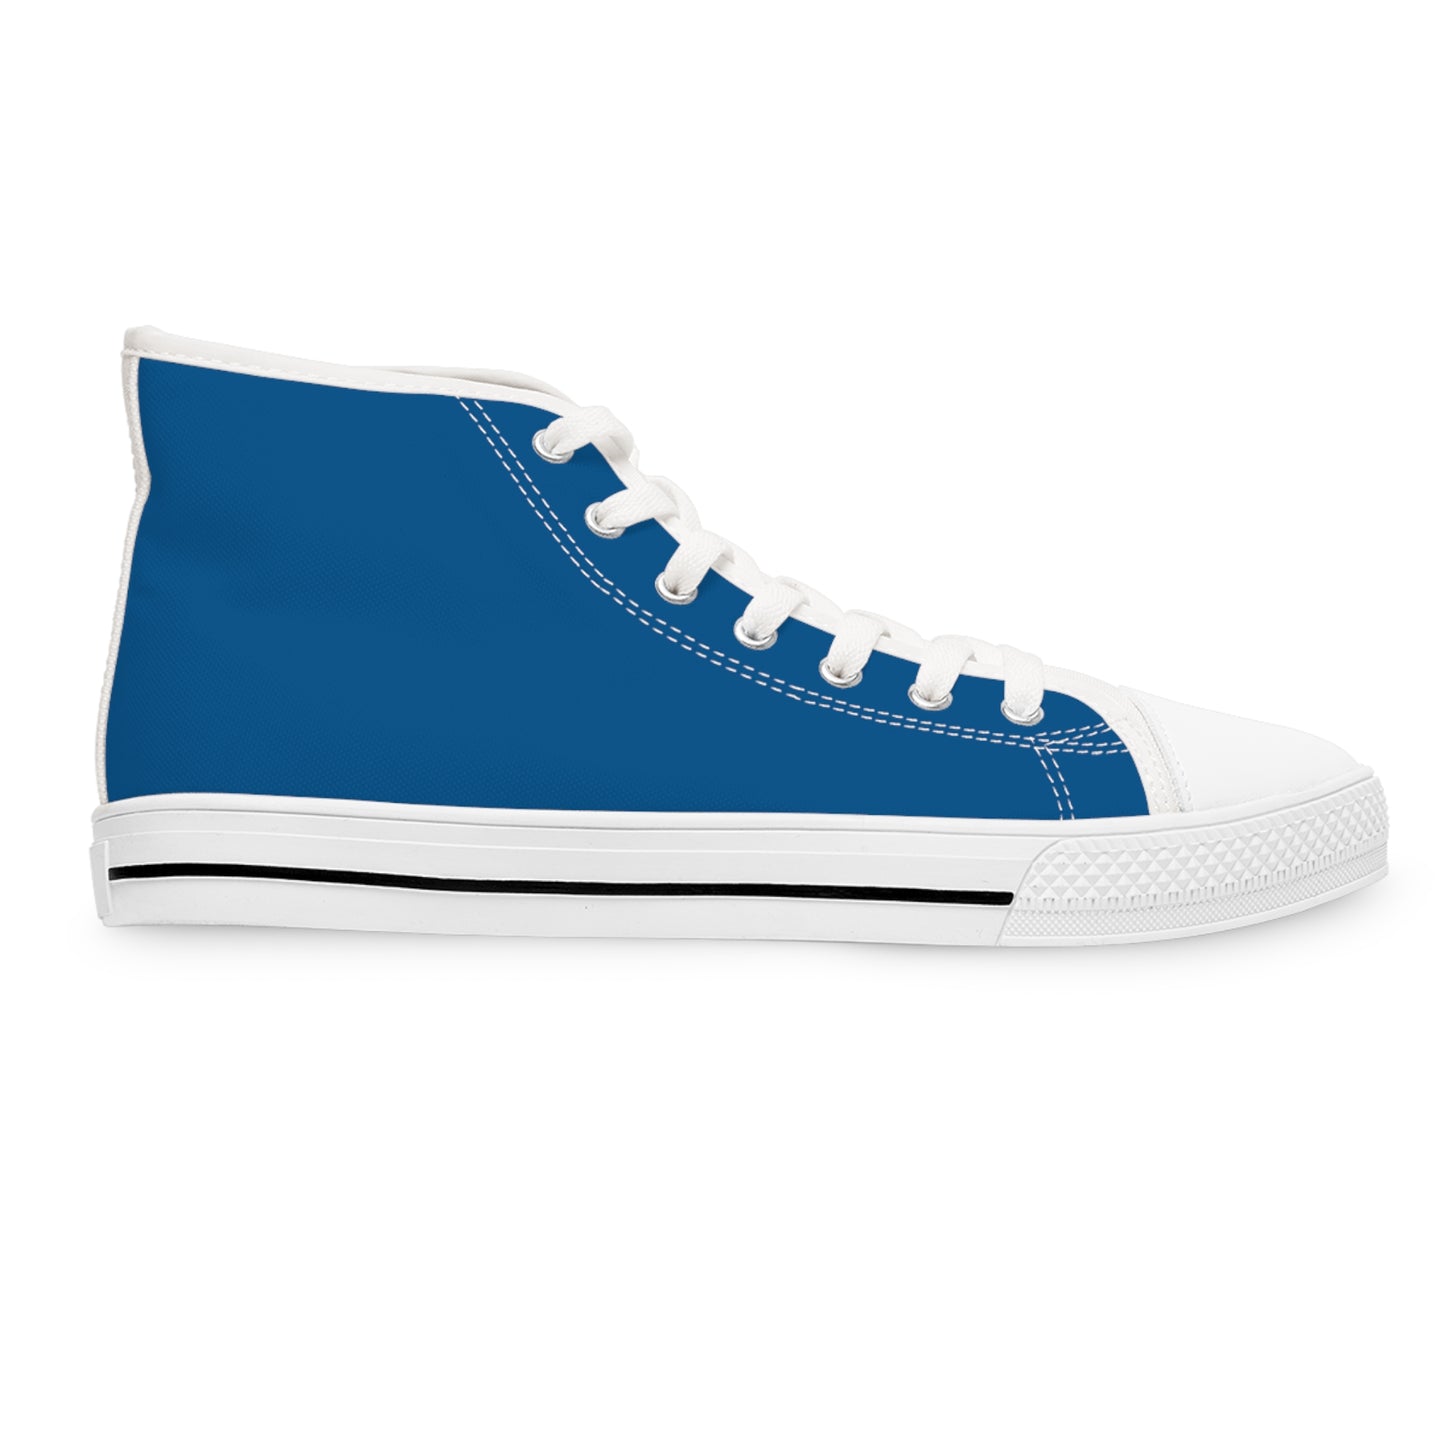 Women's Canvas High Top Solid Color Sneakers - Rich Blue US 12 White sole